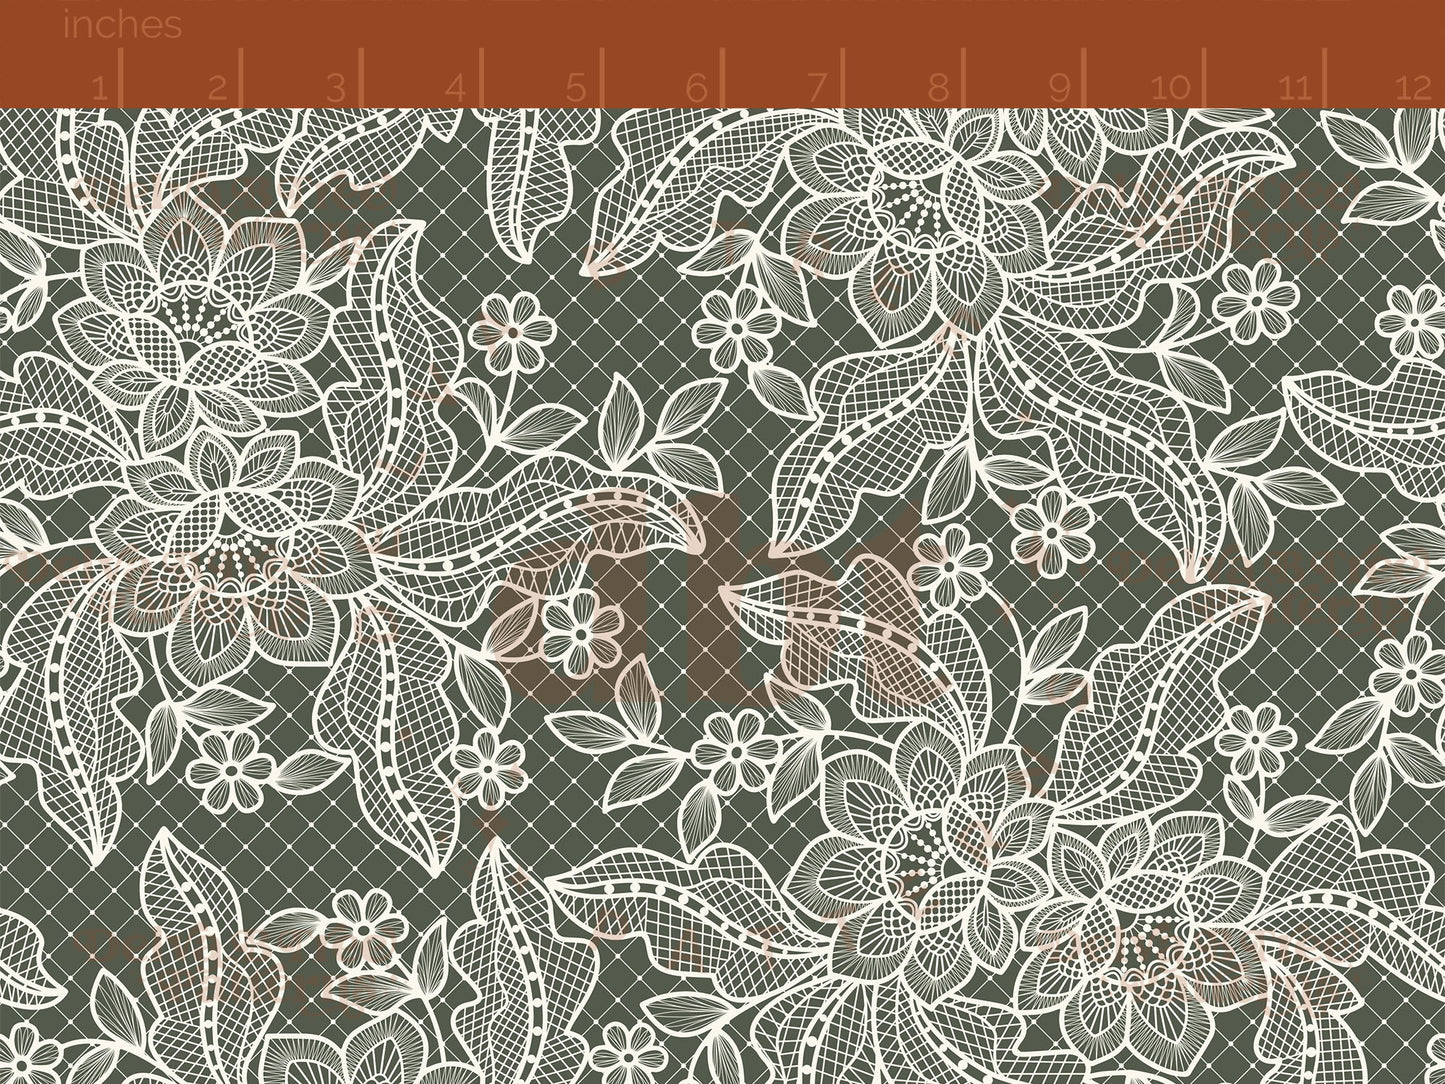 Off white flowers, leaves and faux lace netting on a thyme green background seamless pattern scale digital file for small shops that make handmade products in small batches.